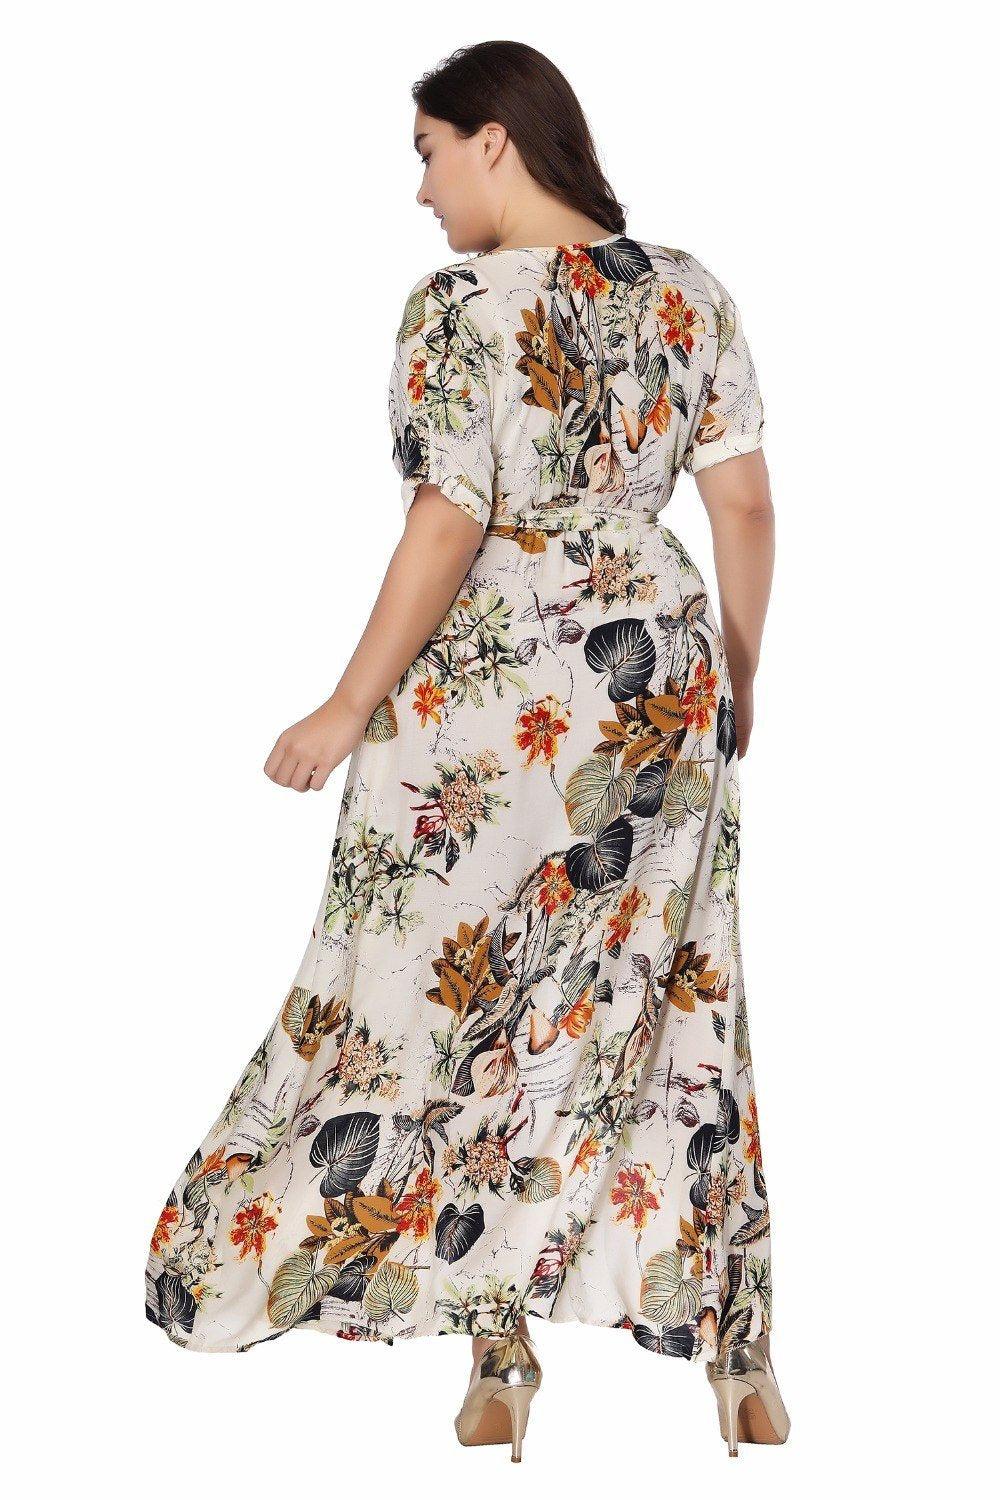 Belted Floral Surplice Overlapped Plus Size Dress